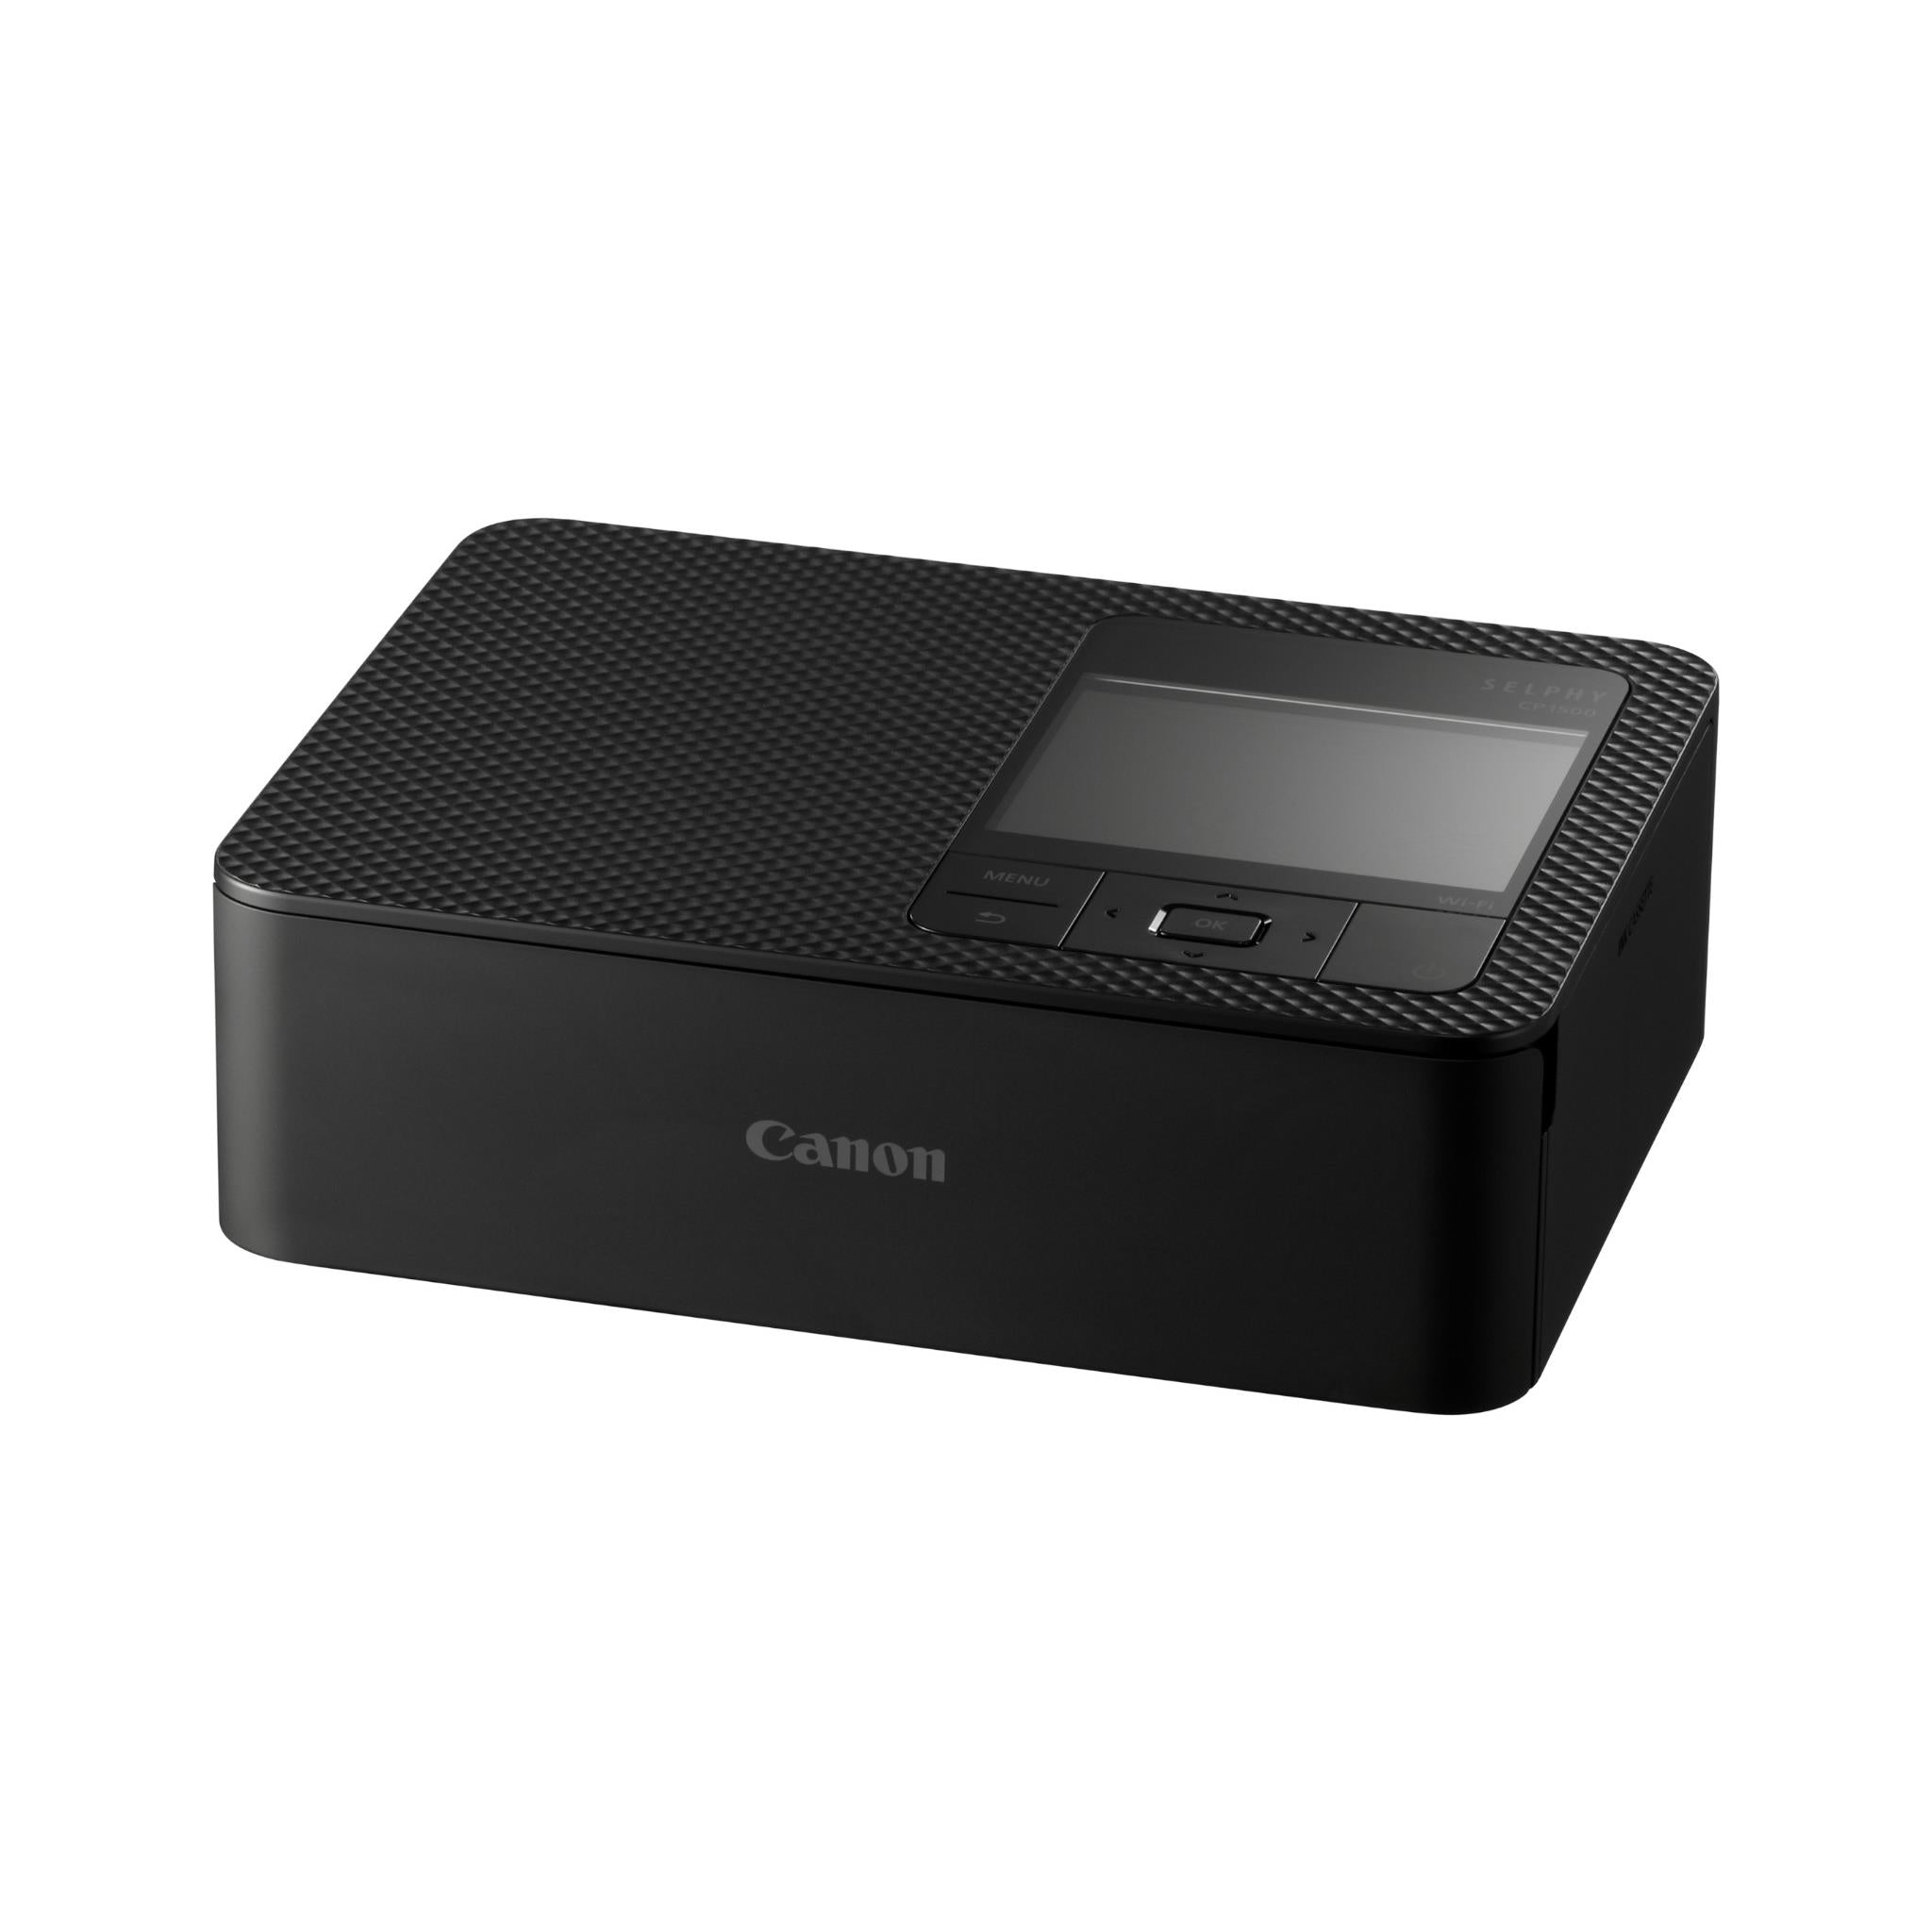 SELPHY CP1300: Now You Can Print Anywhere